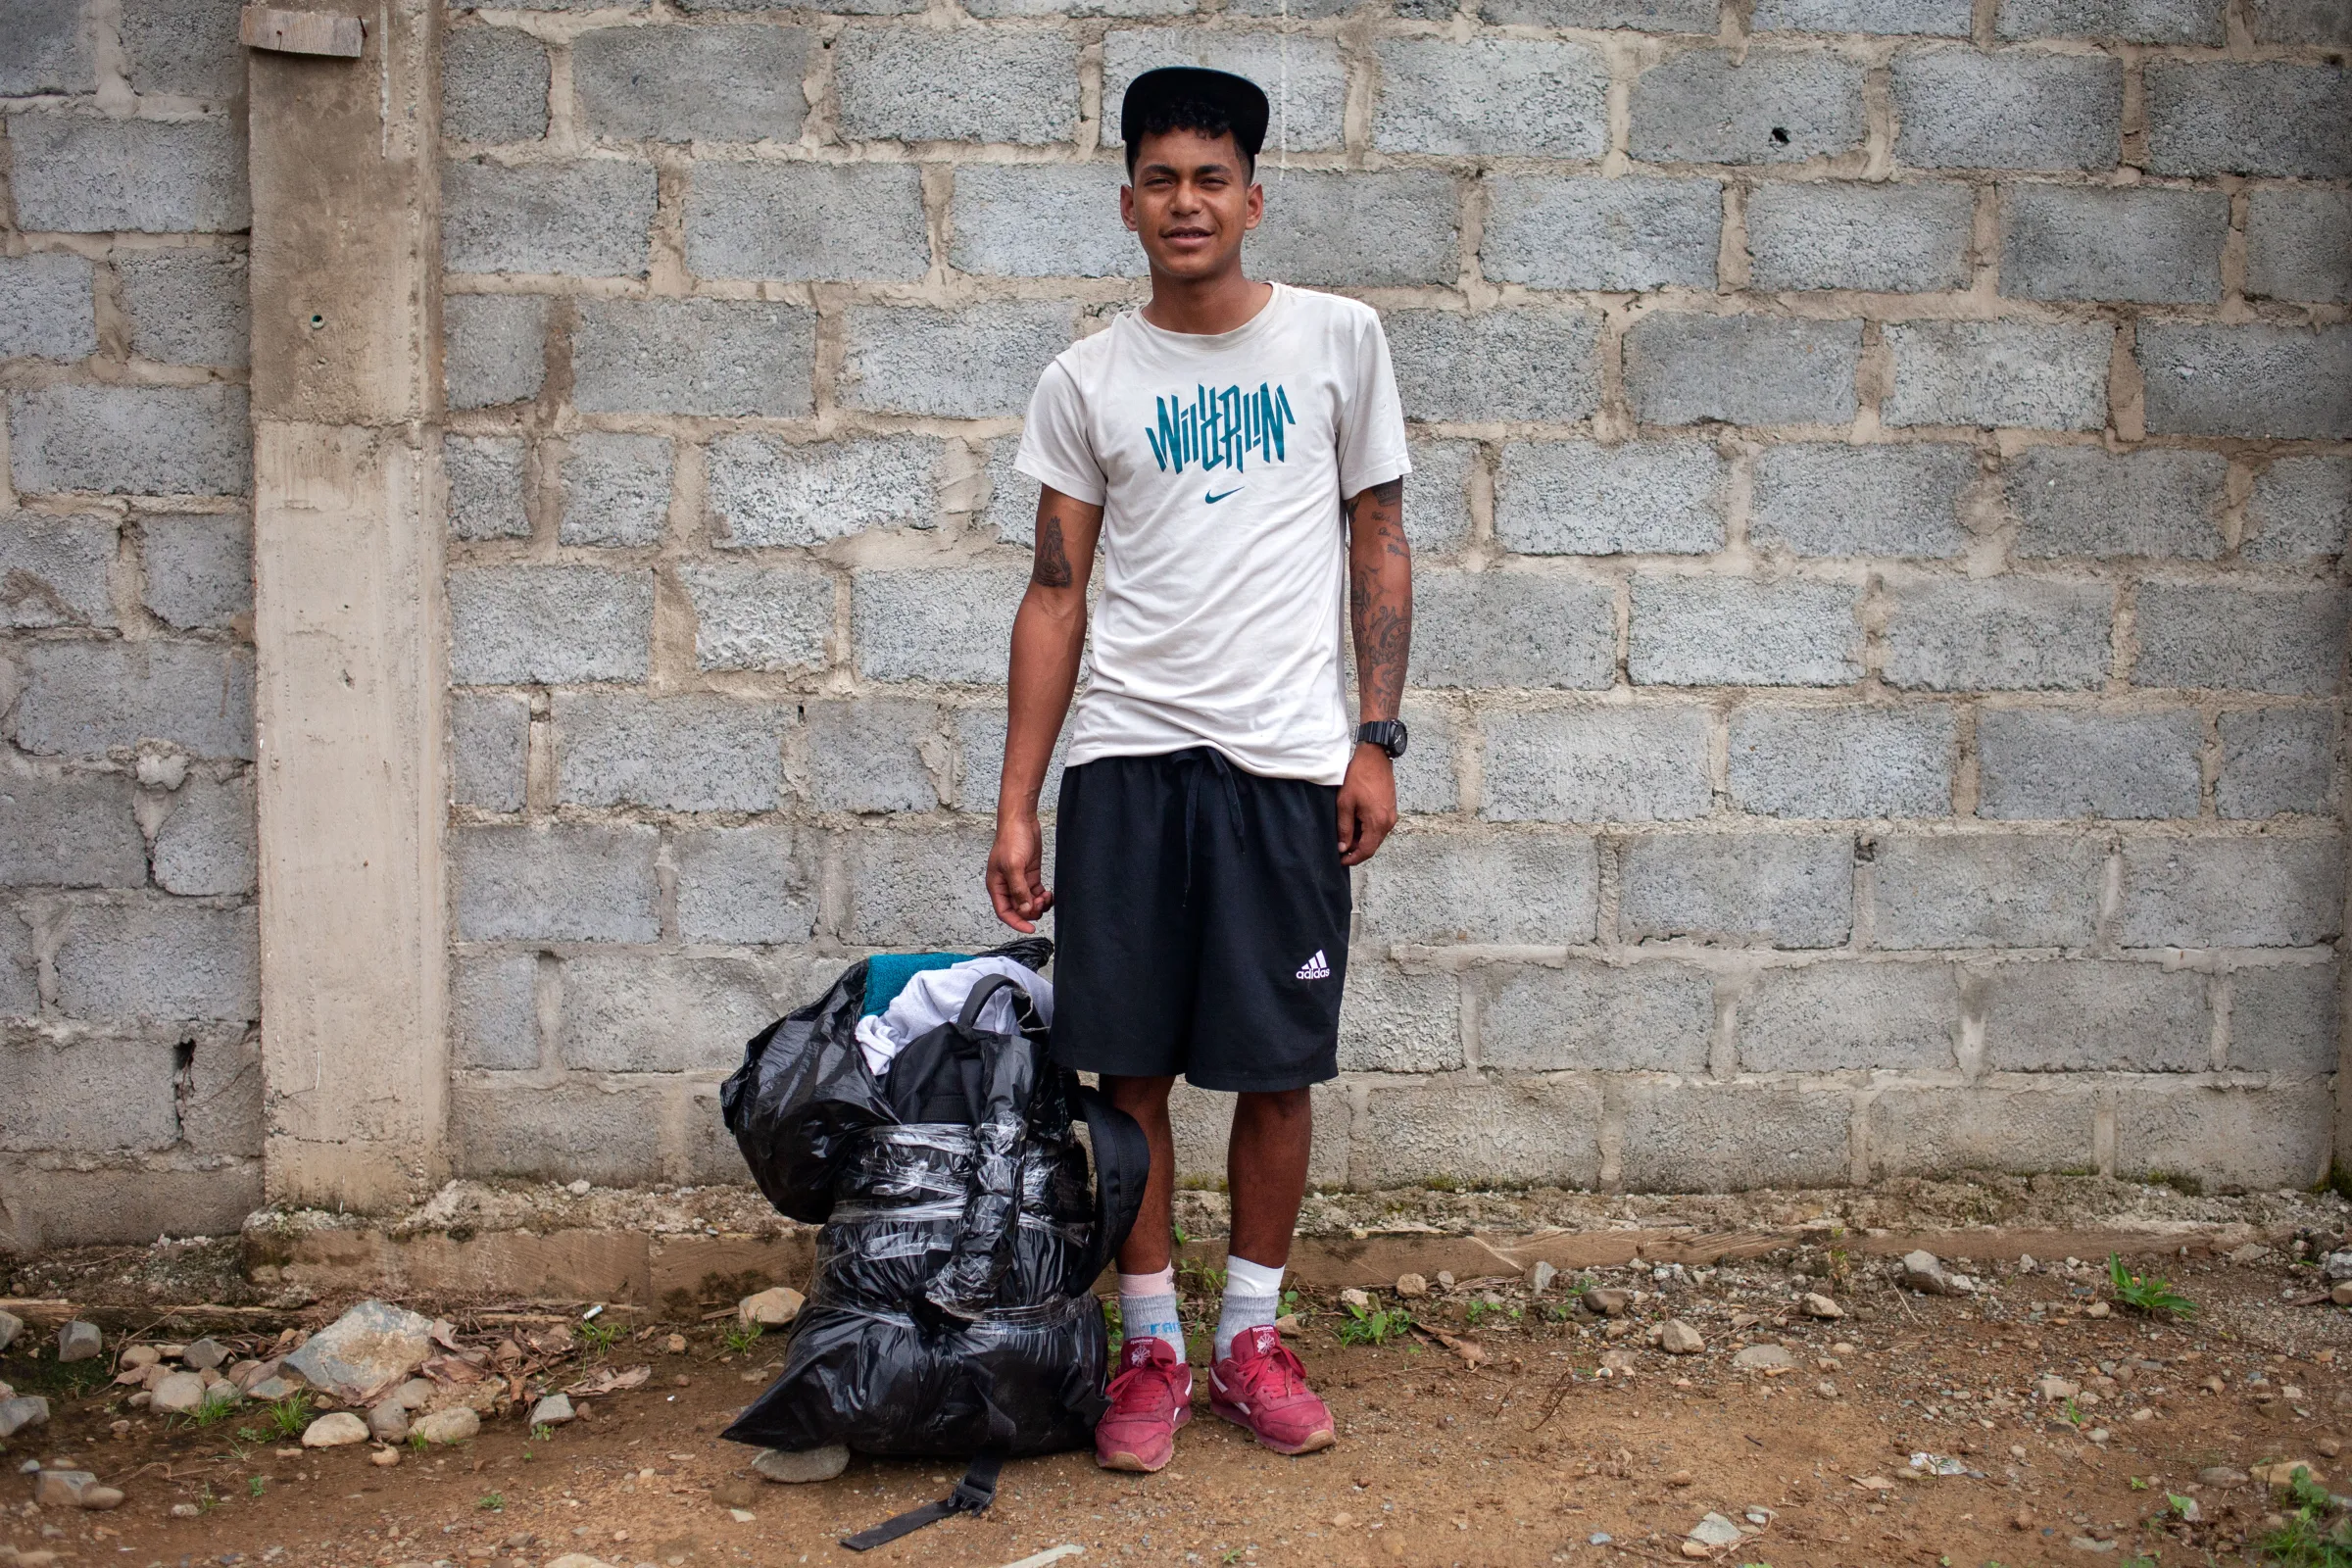 Wilbar, a 19-year-old Venezuelan migrant traveling with a group of Venezuelan families, at a camping site in the Colombian town of Capurganá, standing next to his backpack wrapped with plastic to protect it from the rain before starting the jungle trek through the Darién Gap. Capurganá, Colombia, July 27, 2022. Thomson Reuters Foundation/Fabio Cuttica